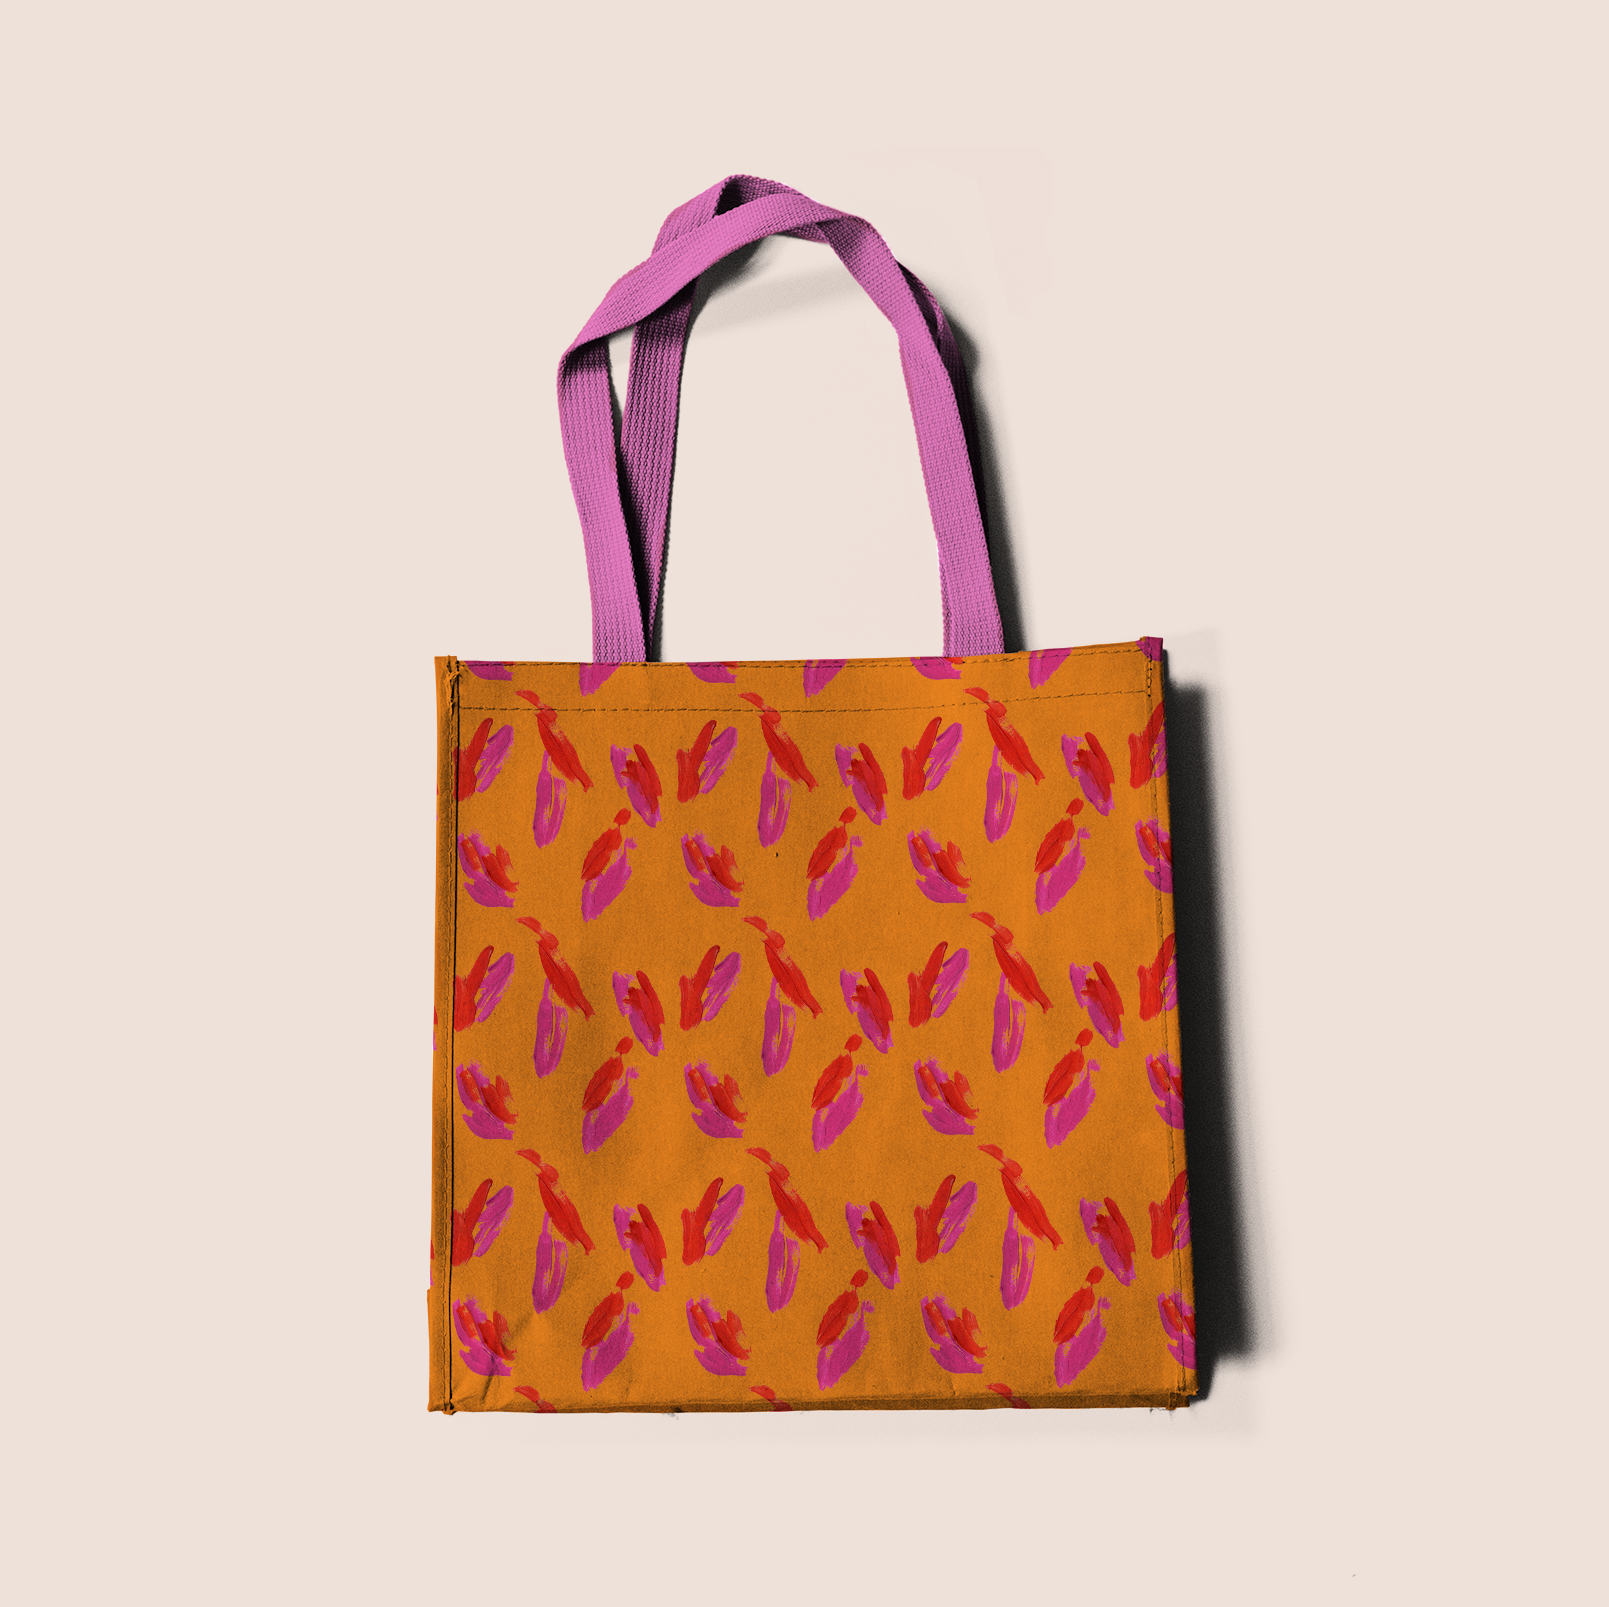 Paint brush strokes red and pink in orange pattern design printed on recycled fabric crafts mockup